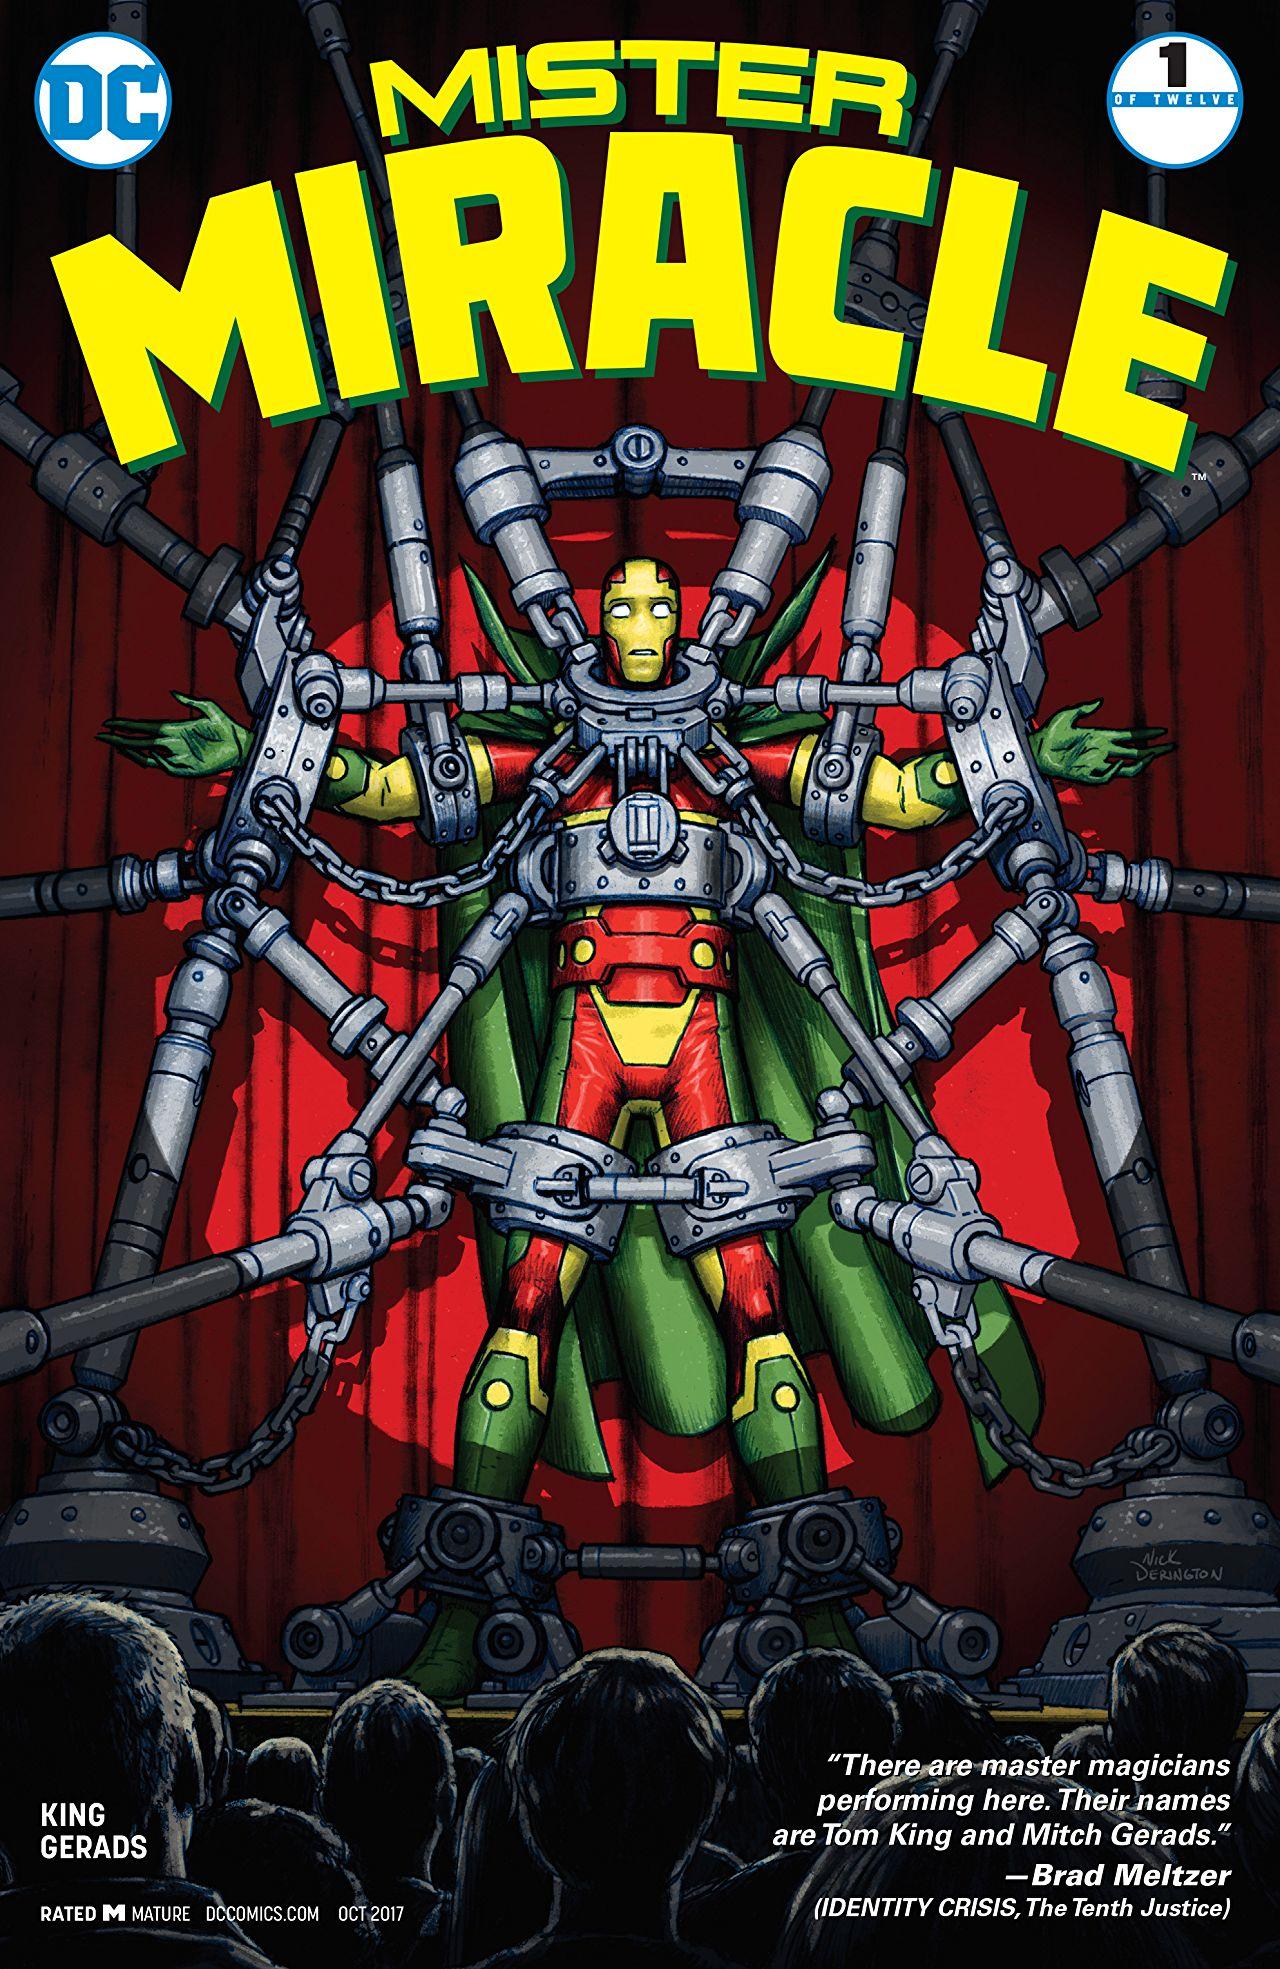 Mister Miracle Vol. 4 #1